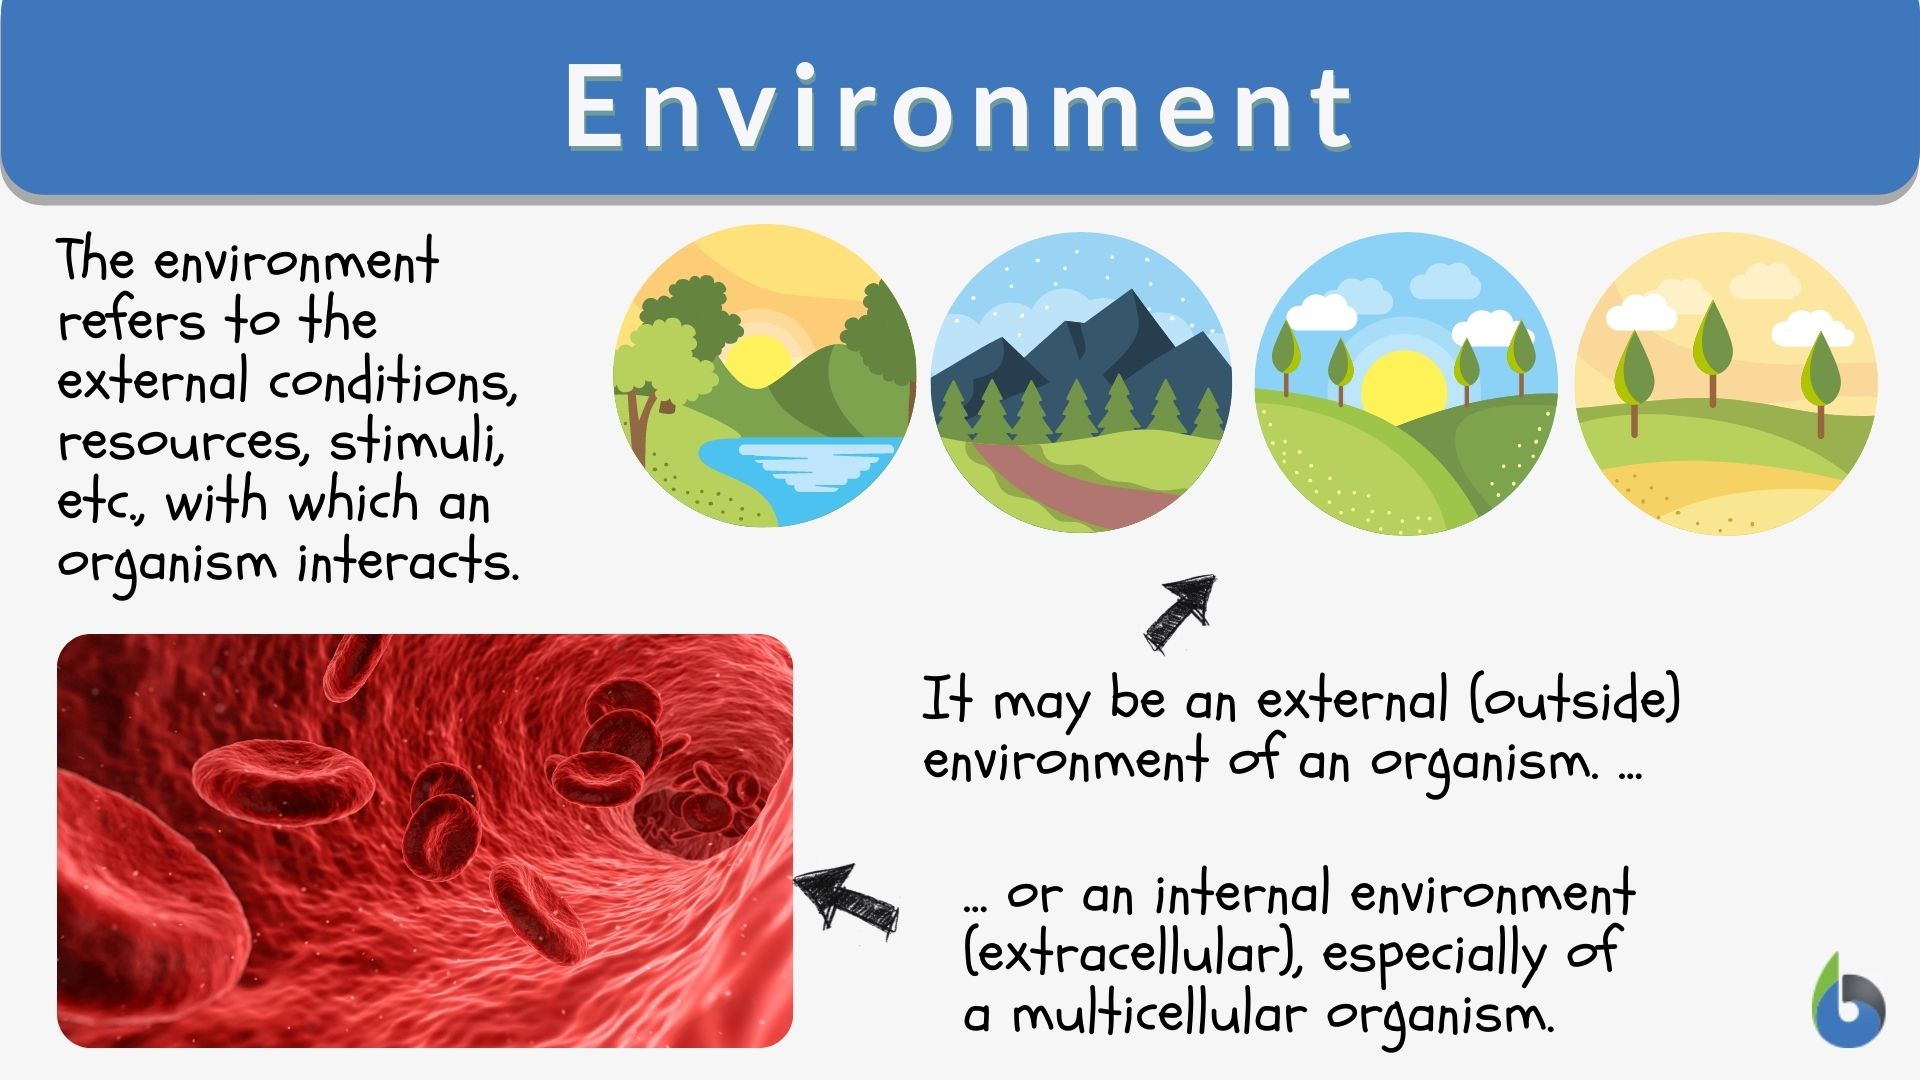 Where are the two types of environment?